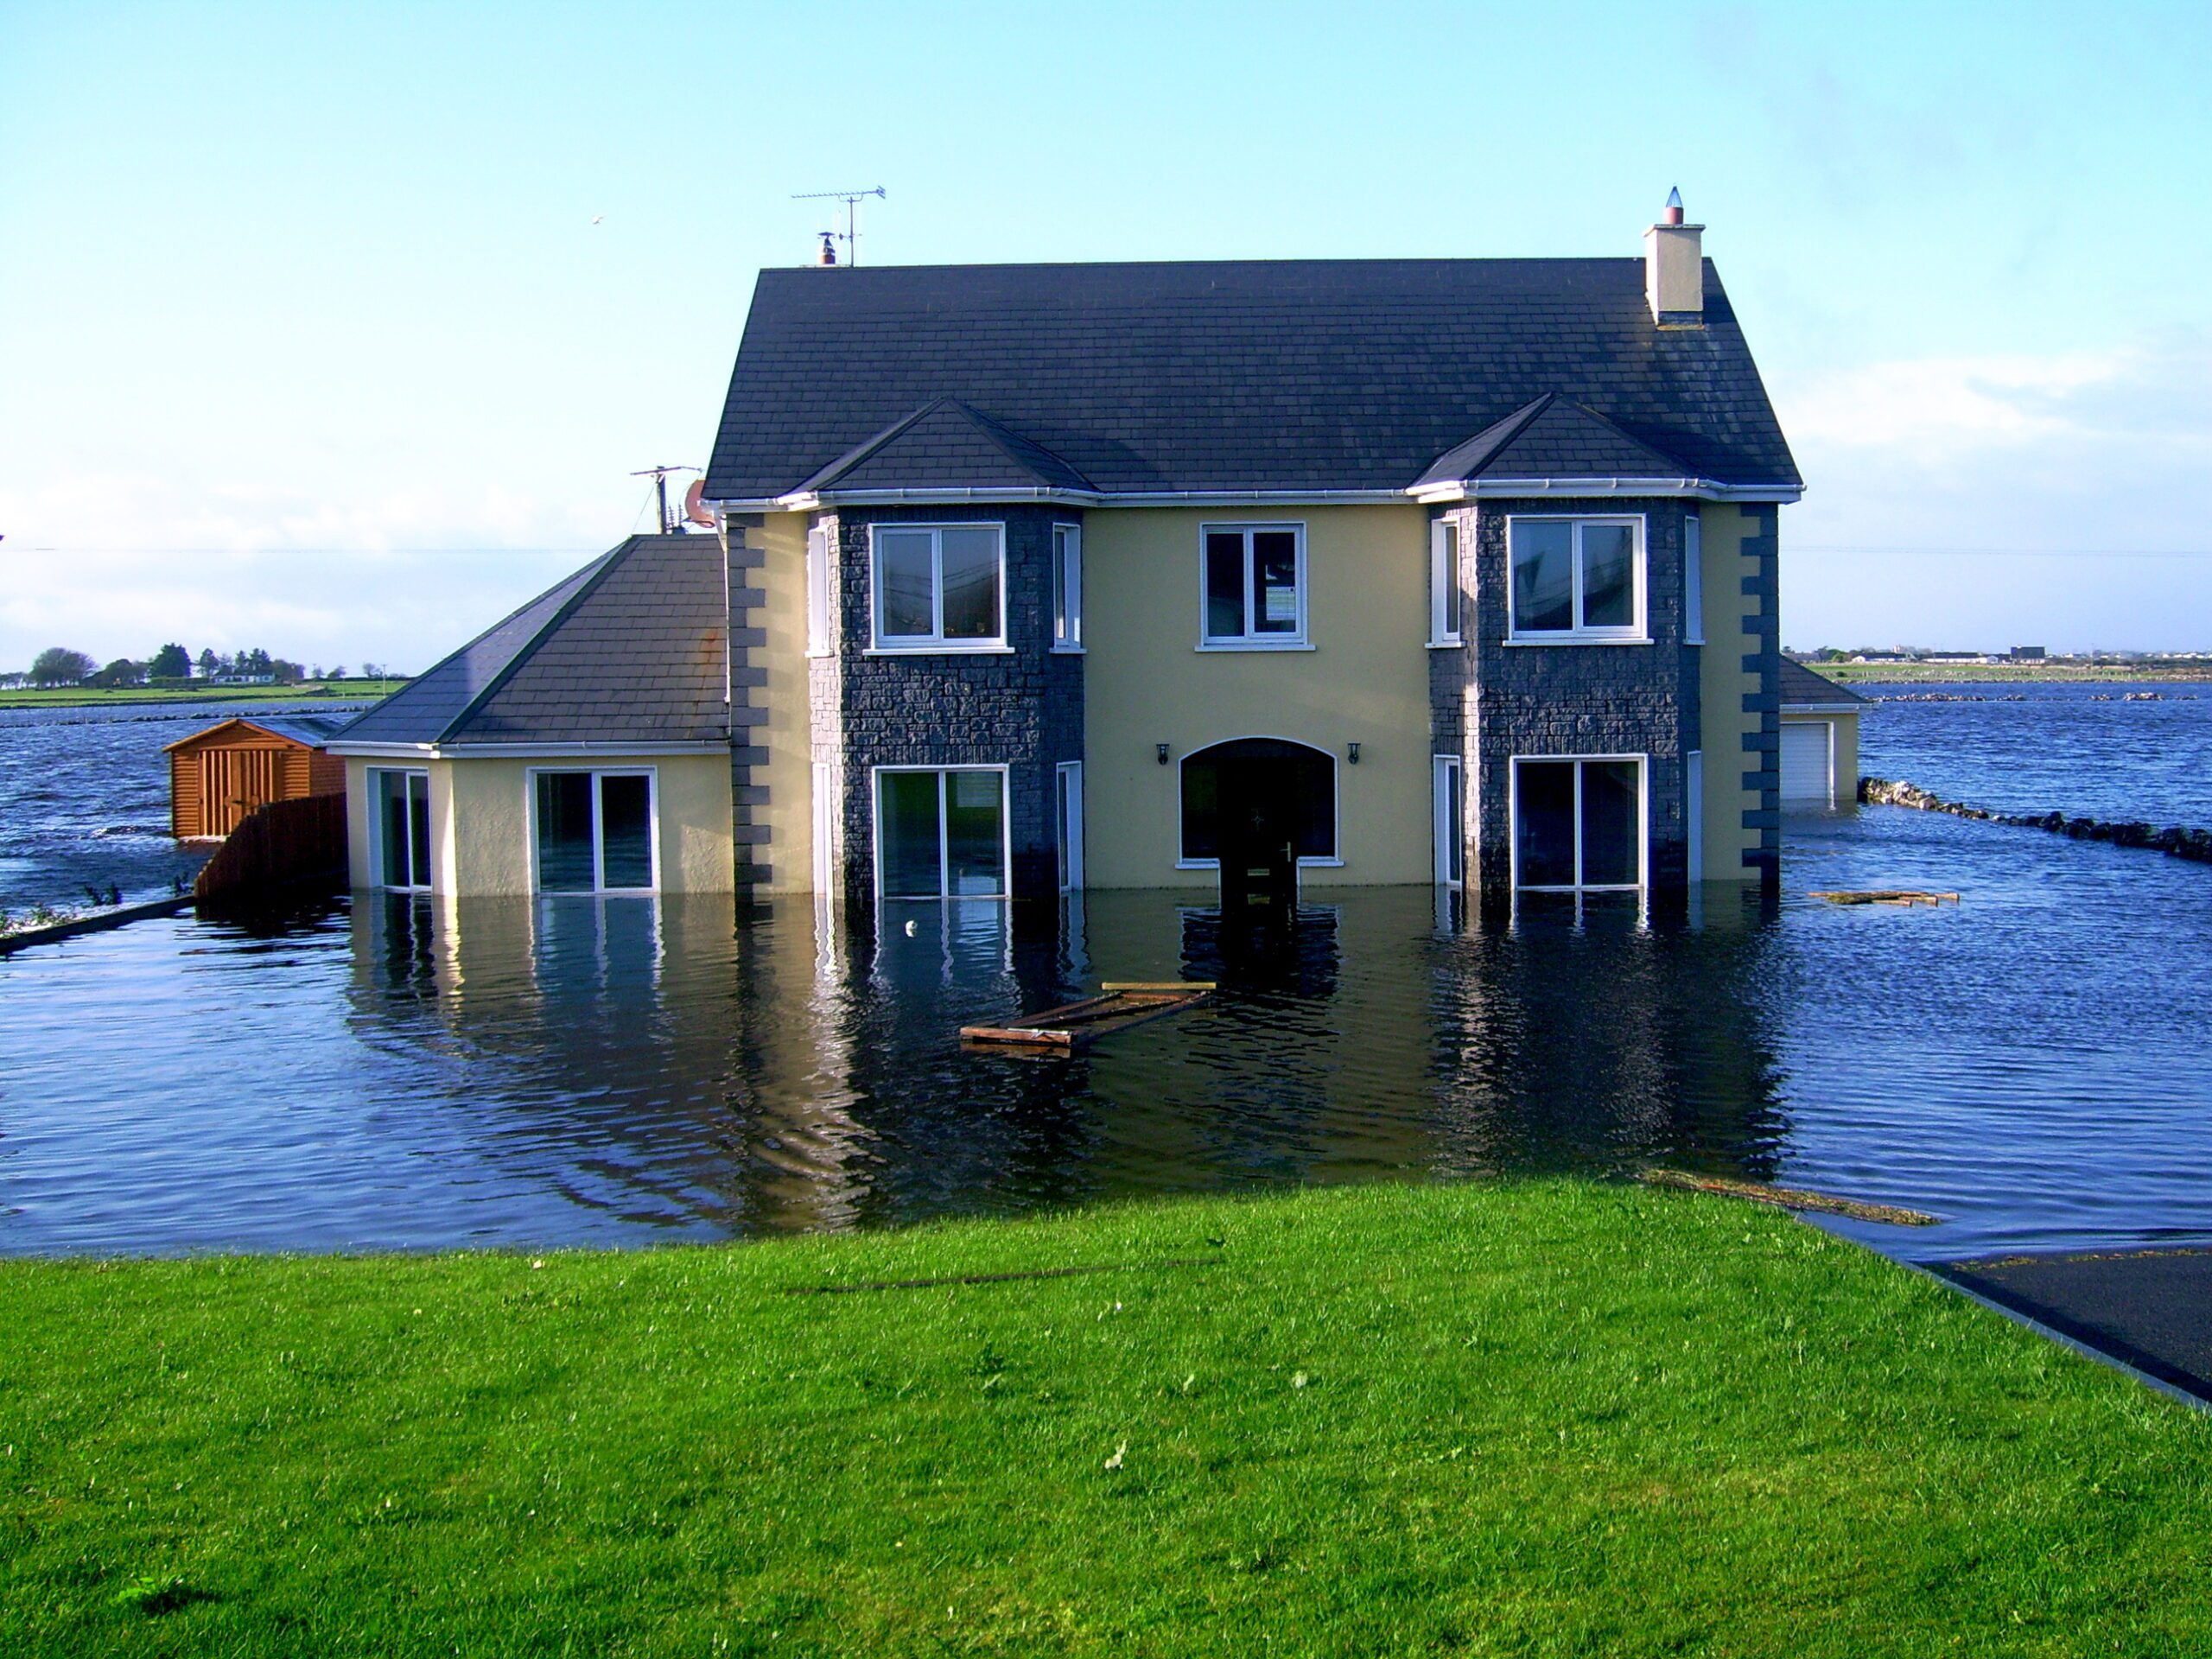 Water and Storm Damage Restoration in The Woodlands